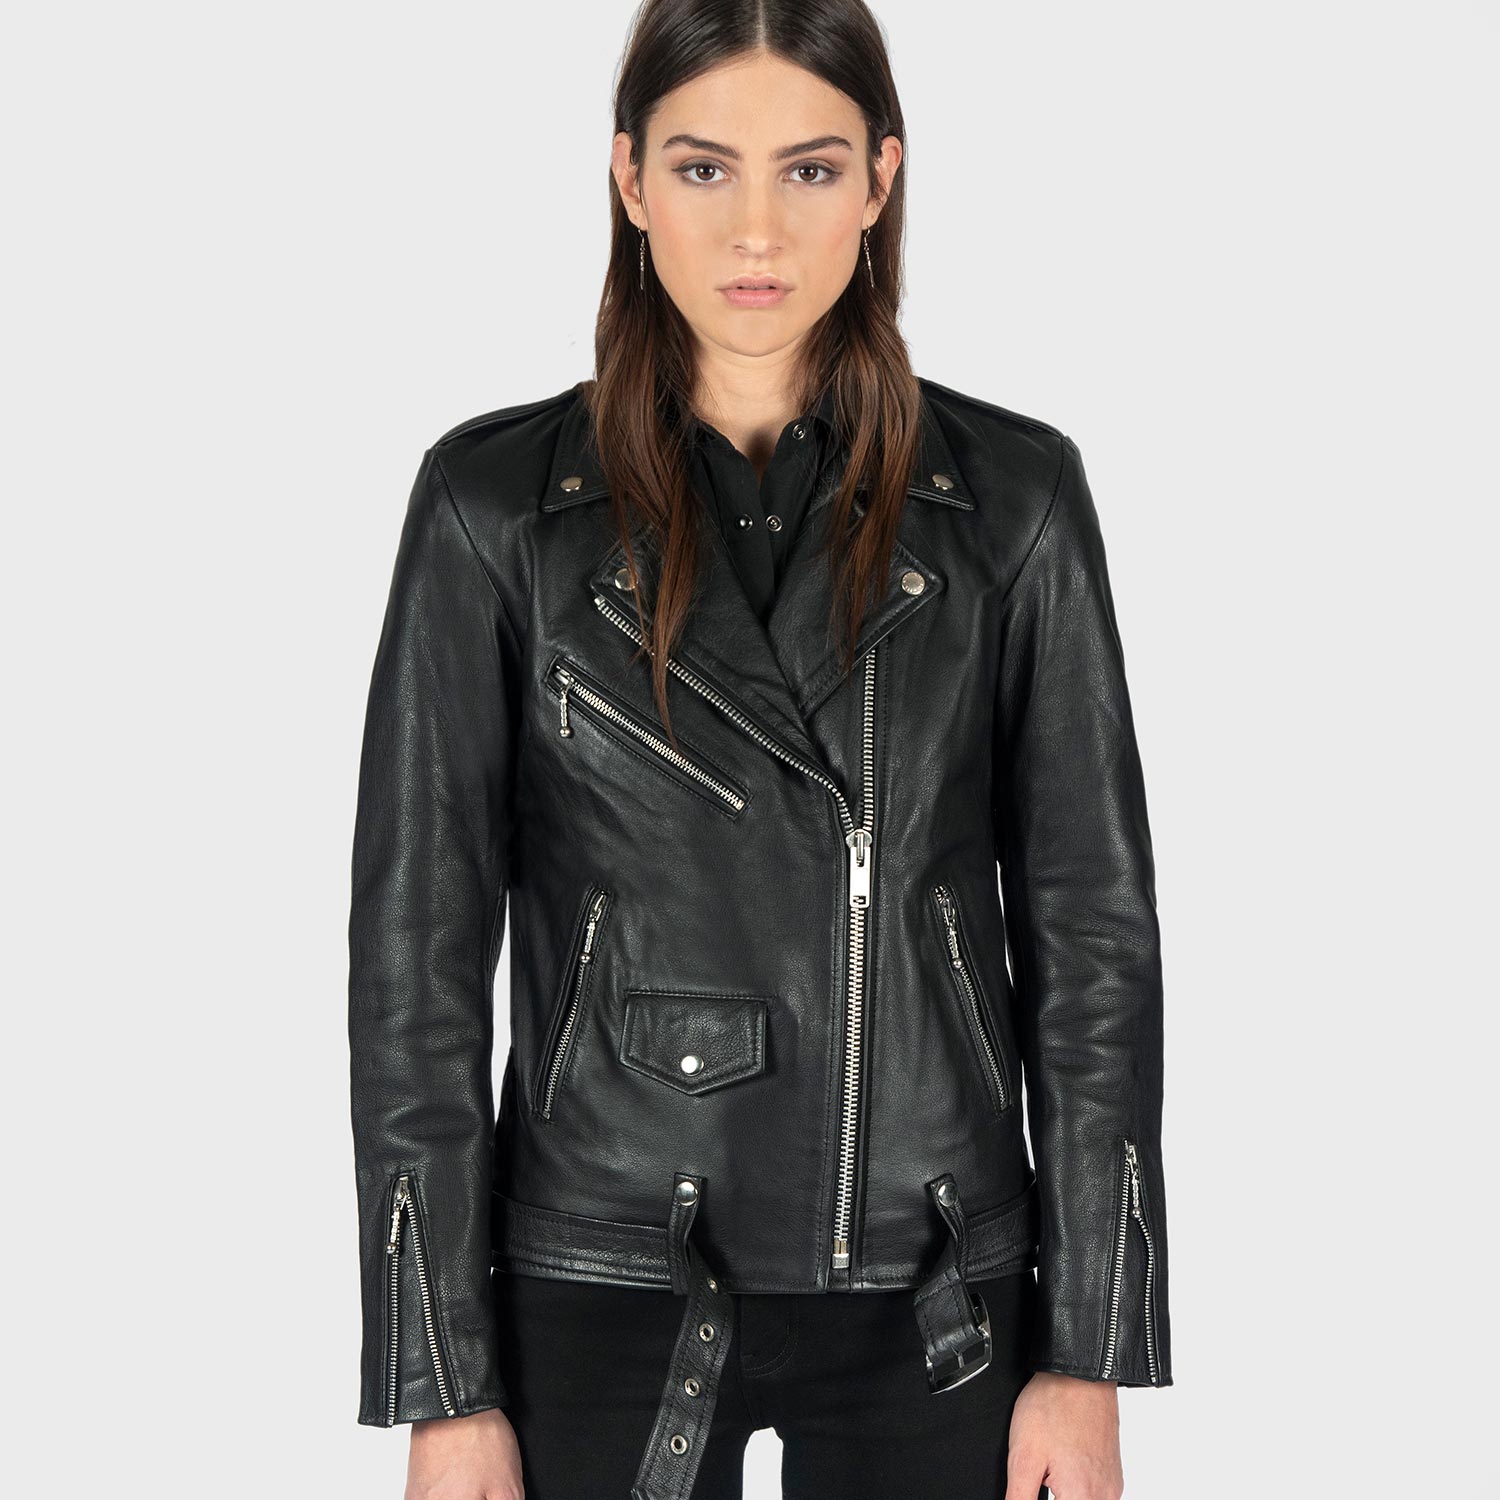 Commando Oversized Black | Jacket and Hell To Straight Apparel Leather Nickel 